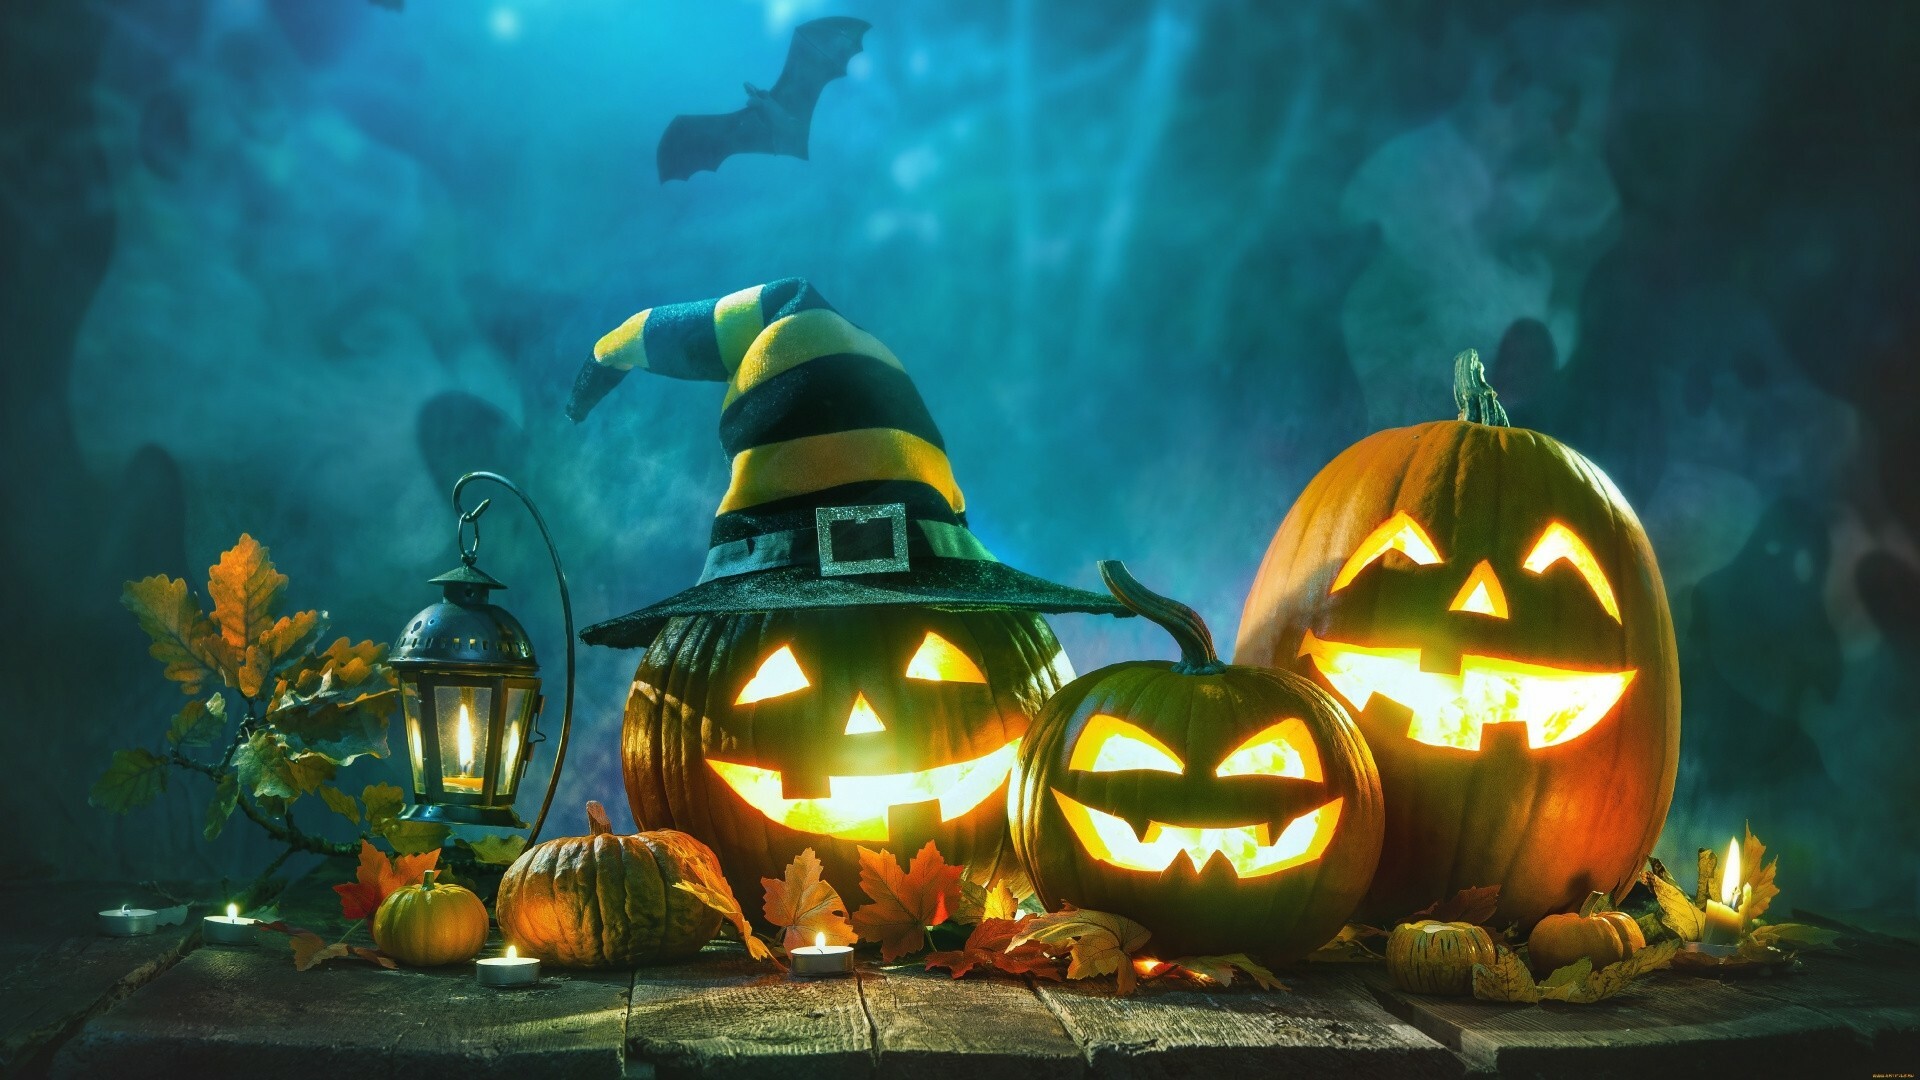 Halloween: Celebrations include costume parties and trick-or-treating, October 31st. 1920x1080 Full HD Wallpaper.